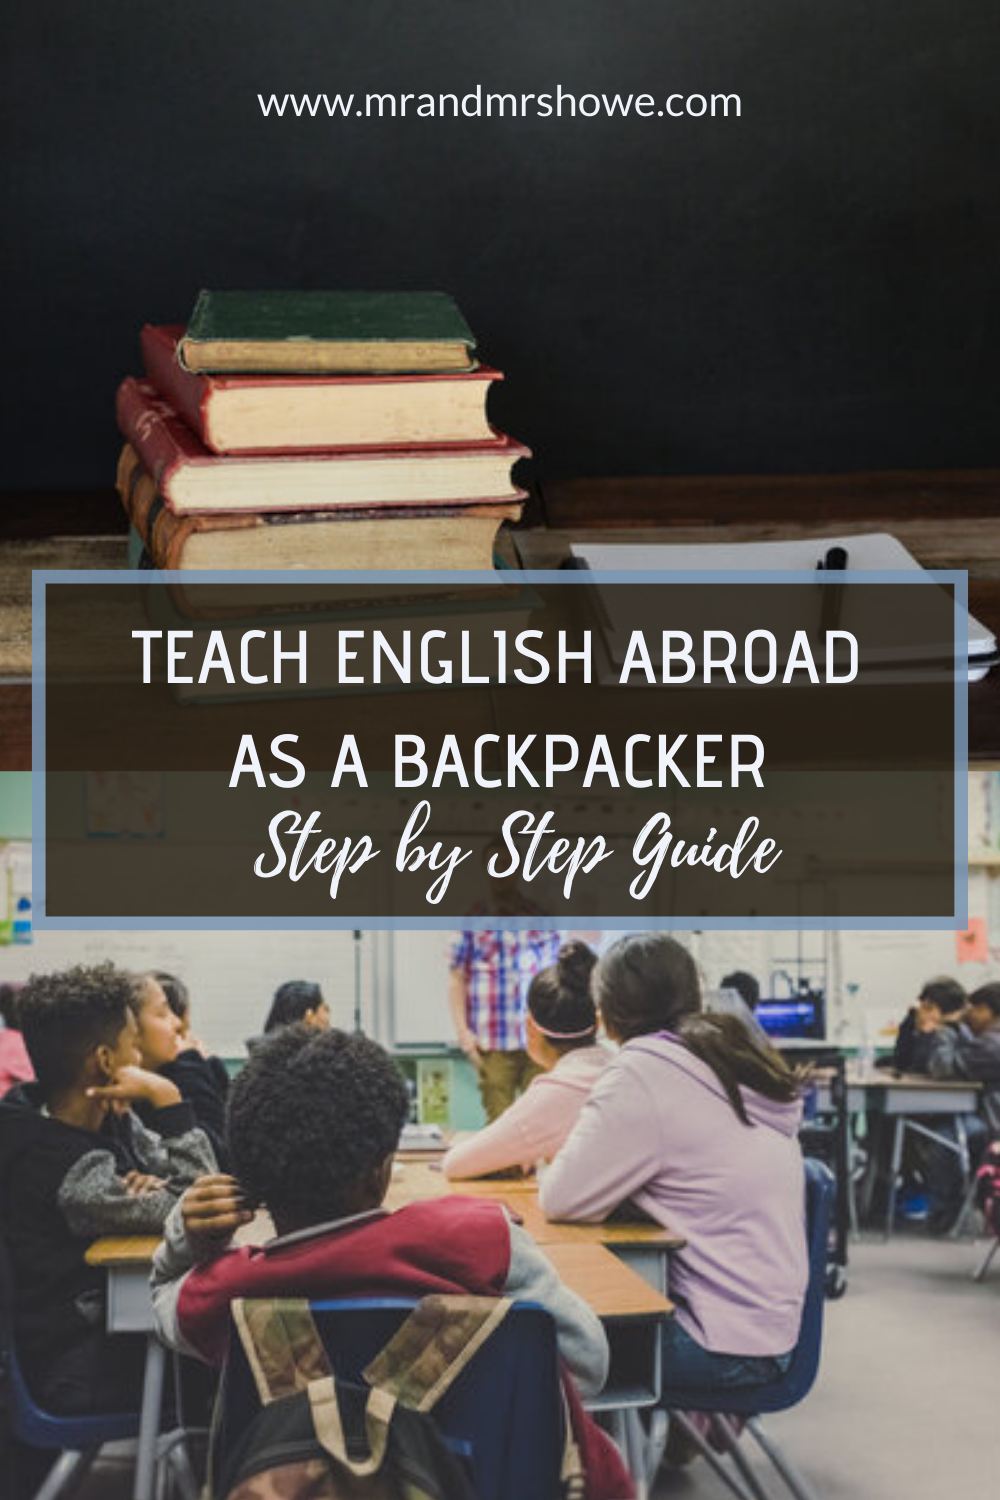 Step-by-Step Guide on How to Teach English Abroad as a Backpacker1.png